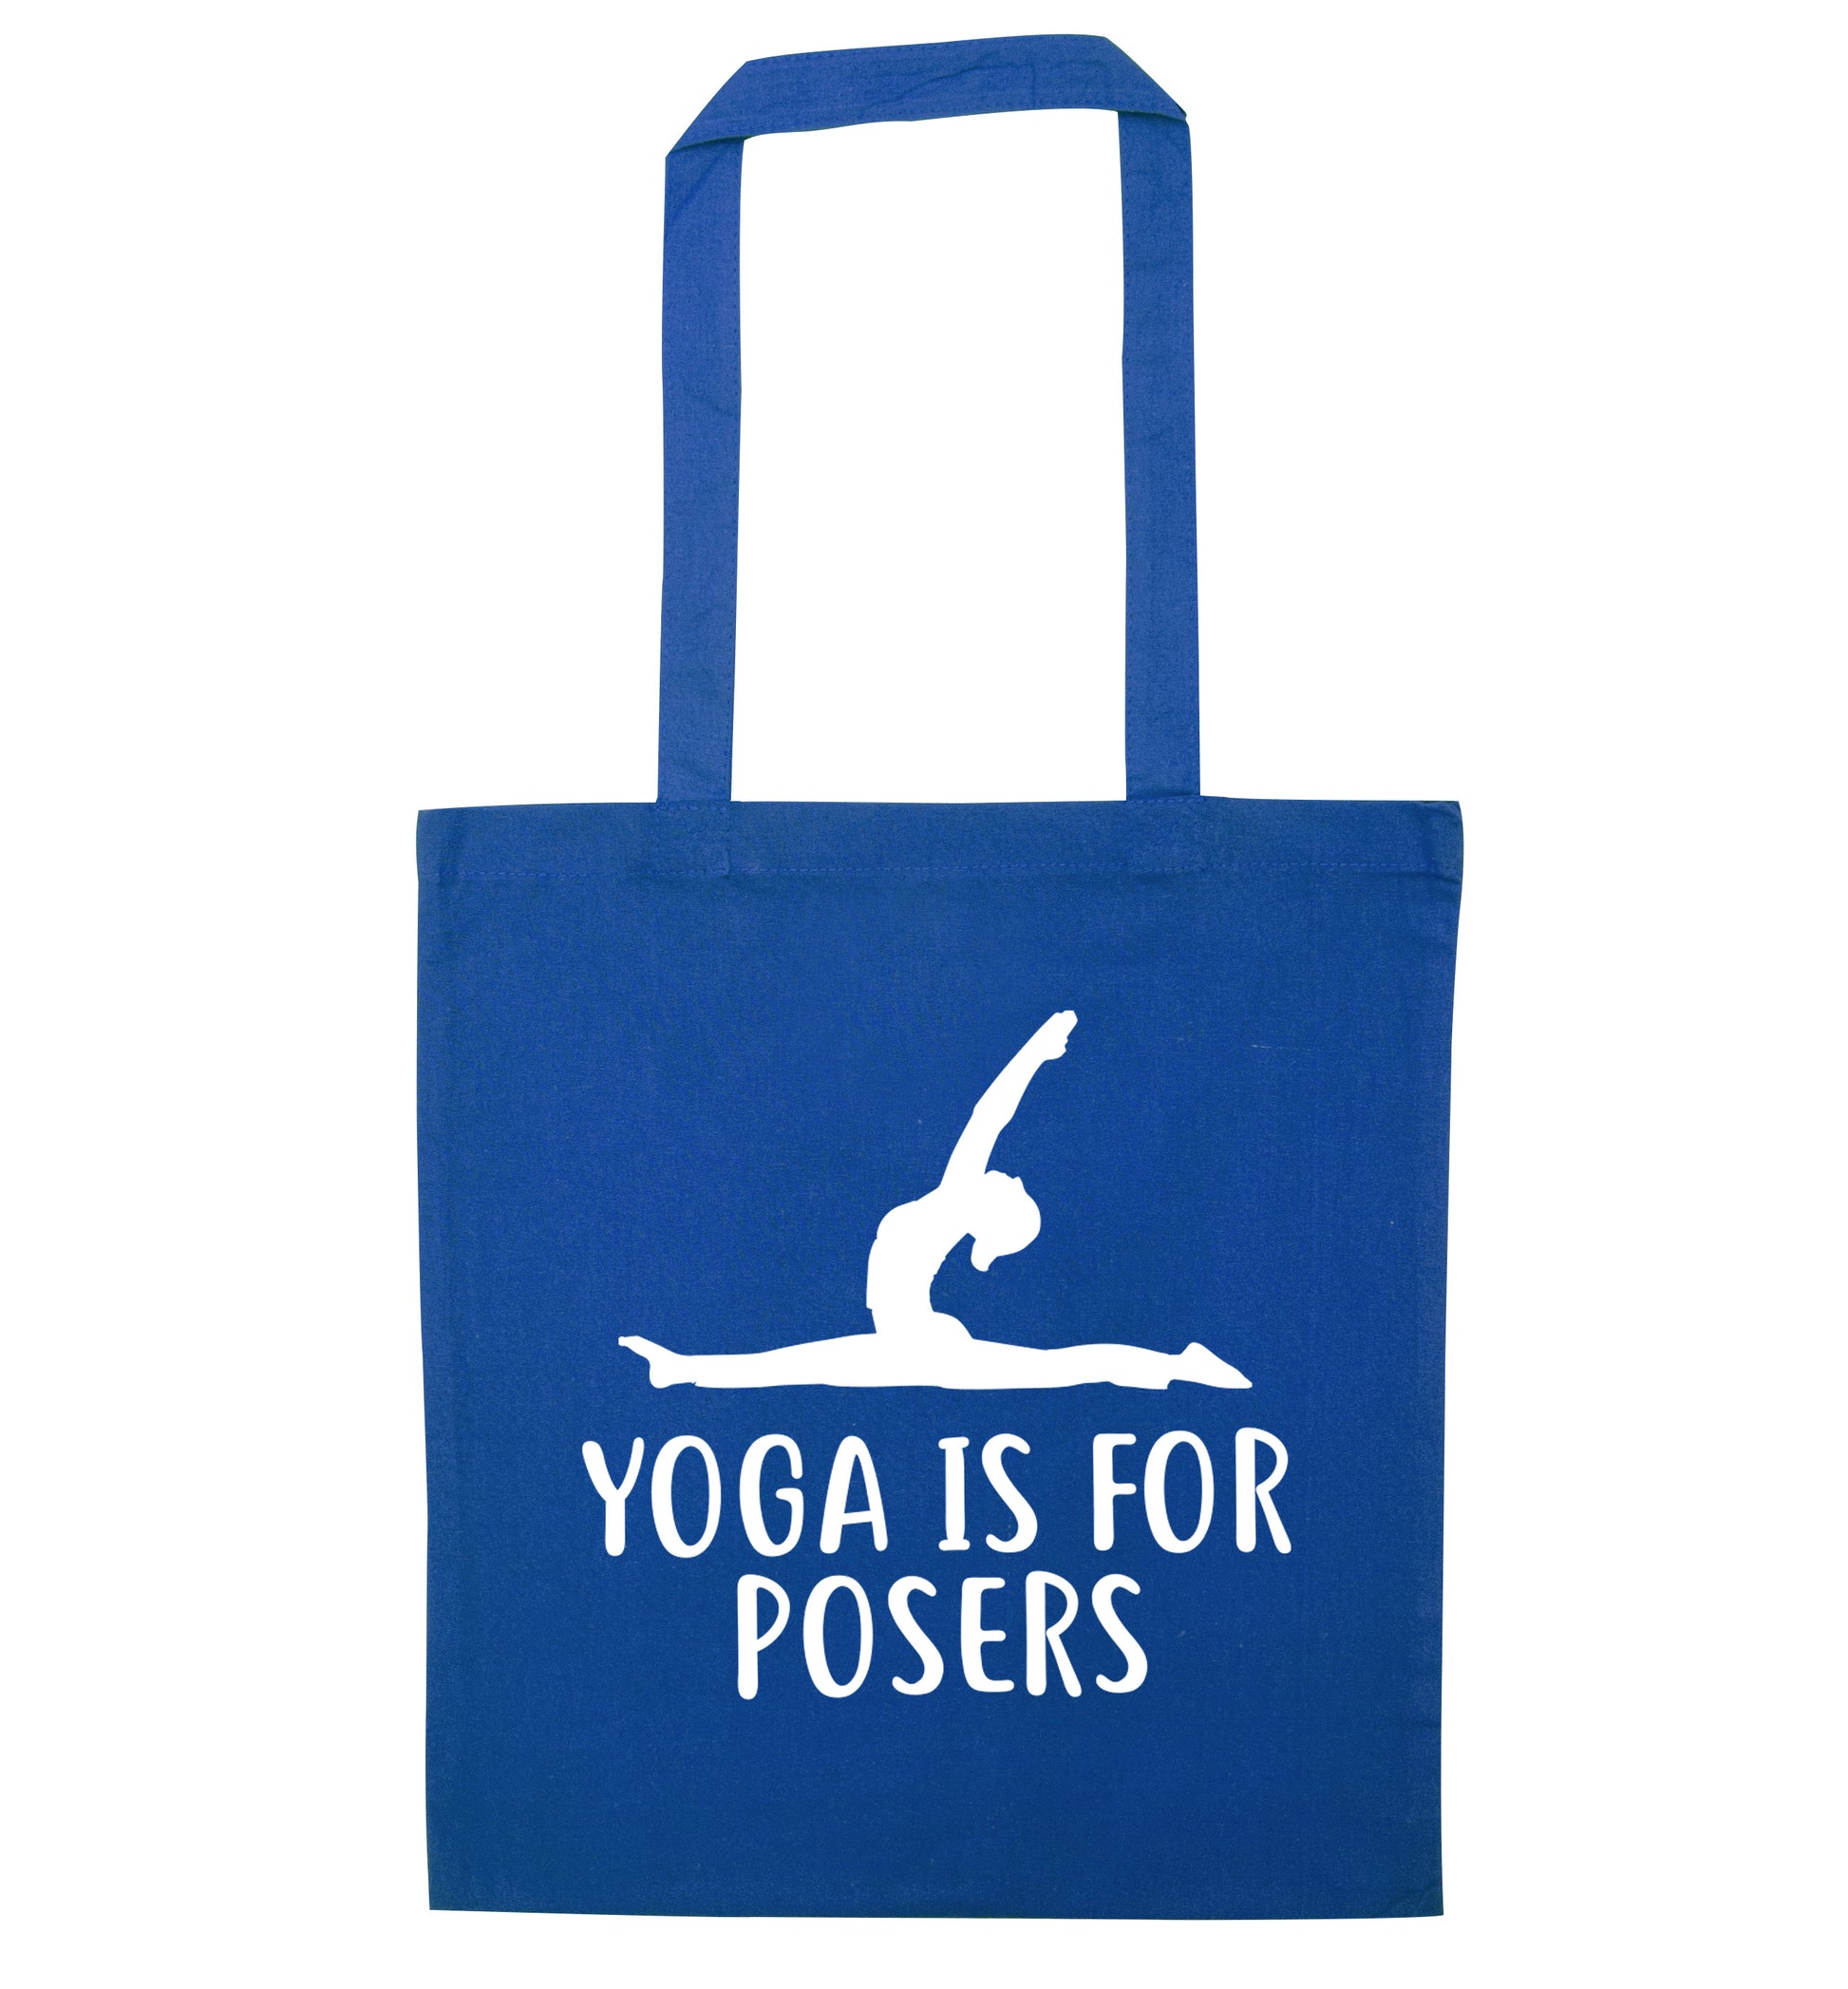 Yoga is for posers blue tote bag